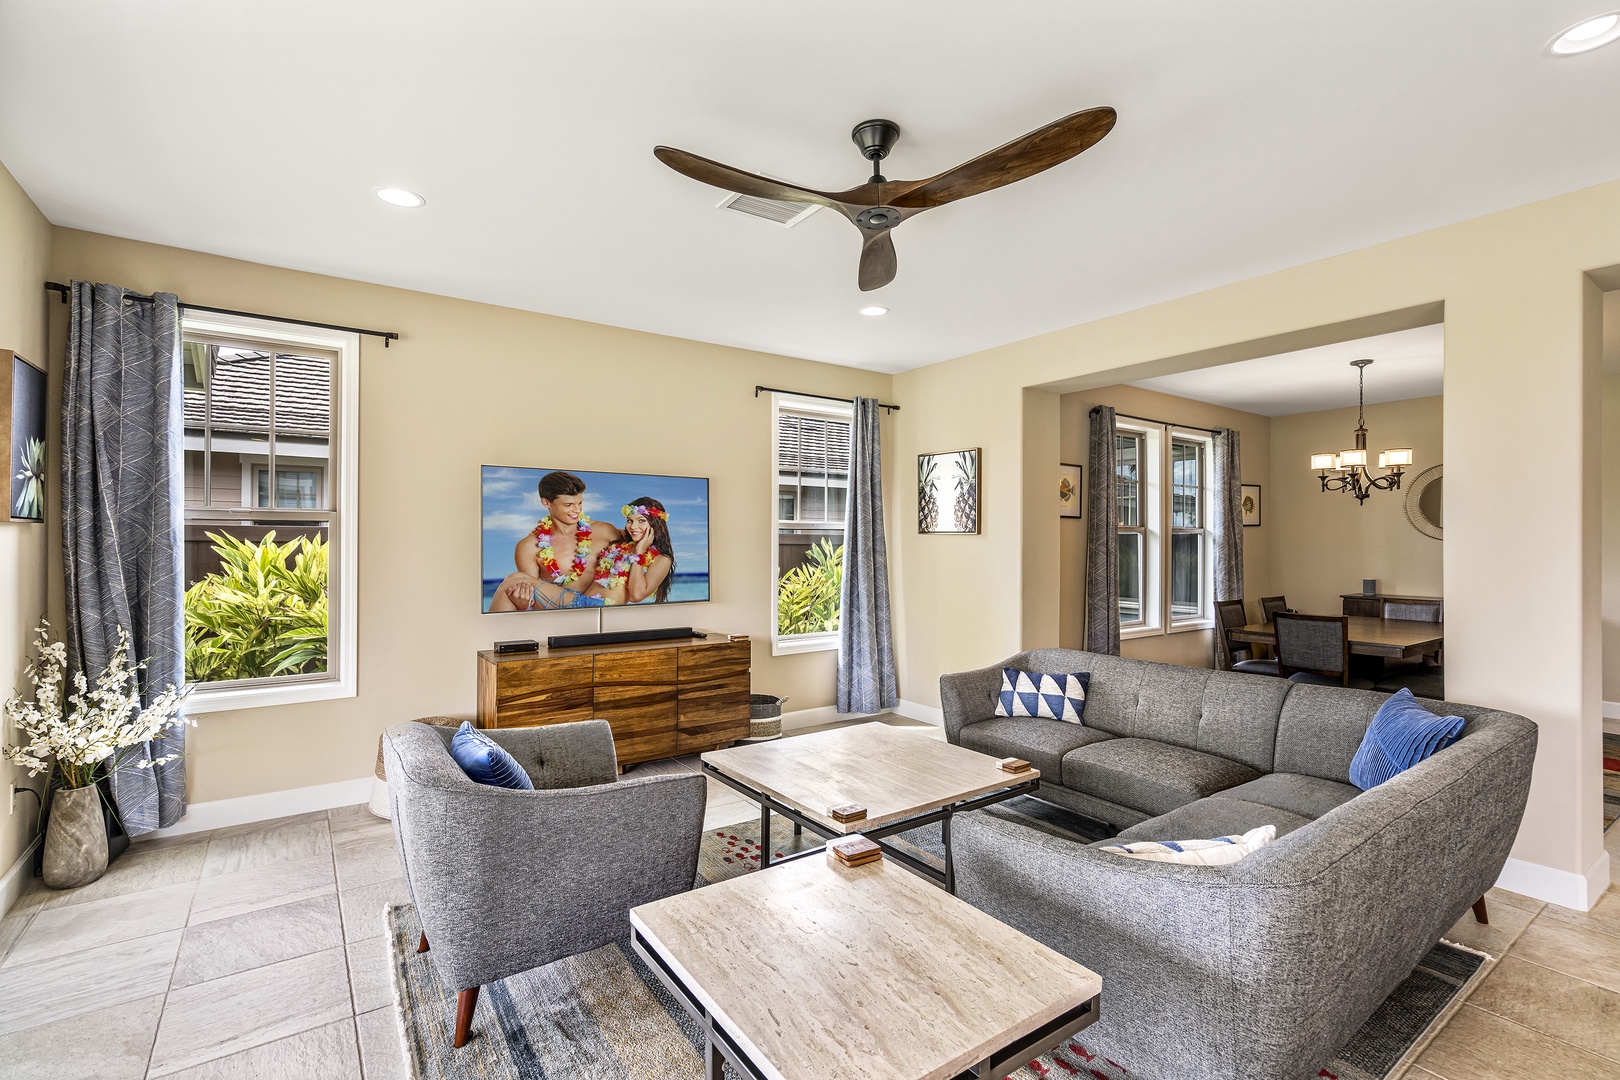 Kailua Kona Vacation Rentals, Holua Kai #9 - Smart features such as TV's in every room and Alexa can be found here as well!